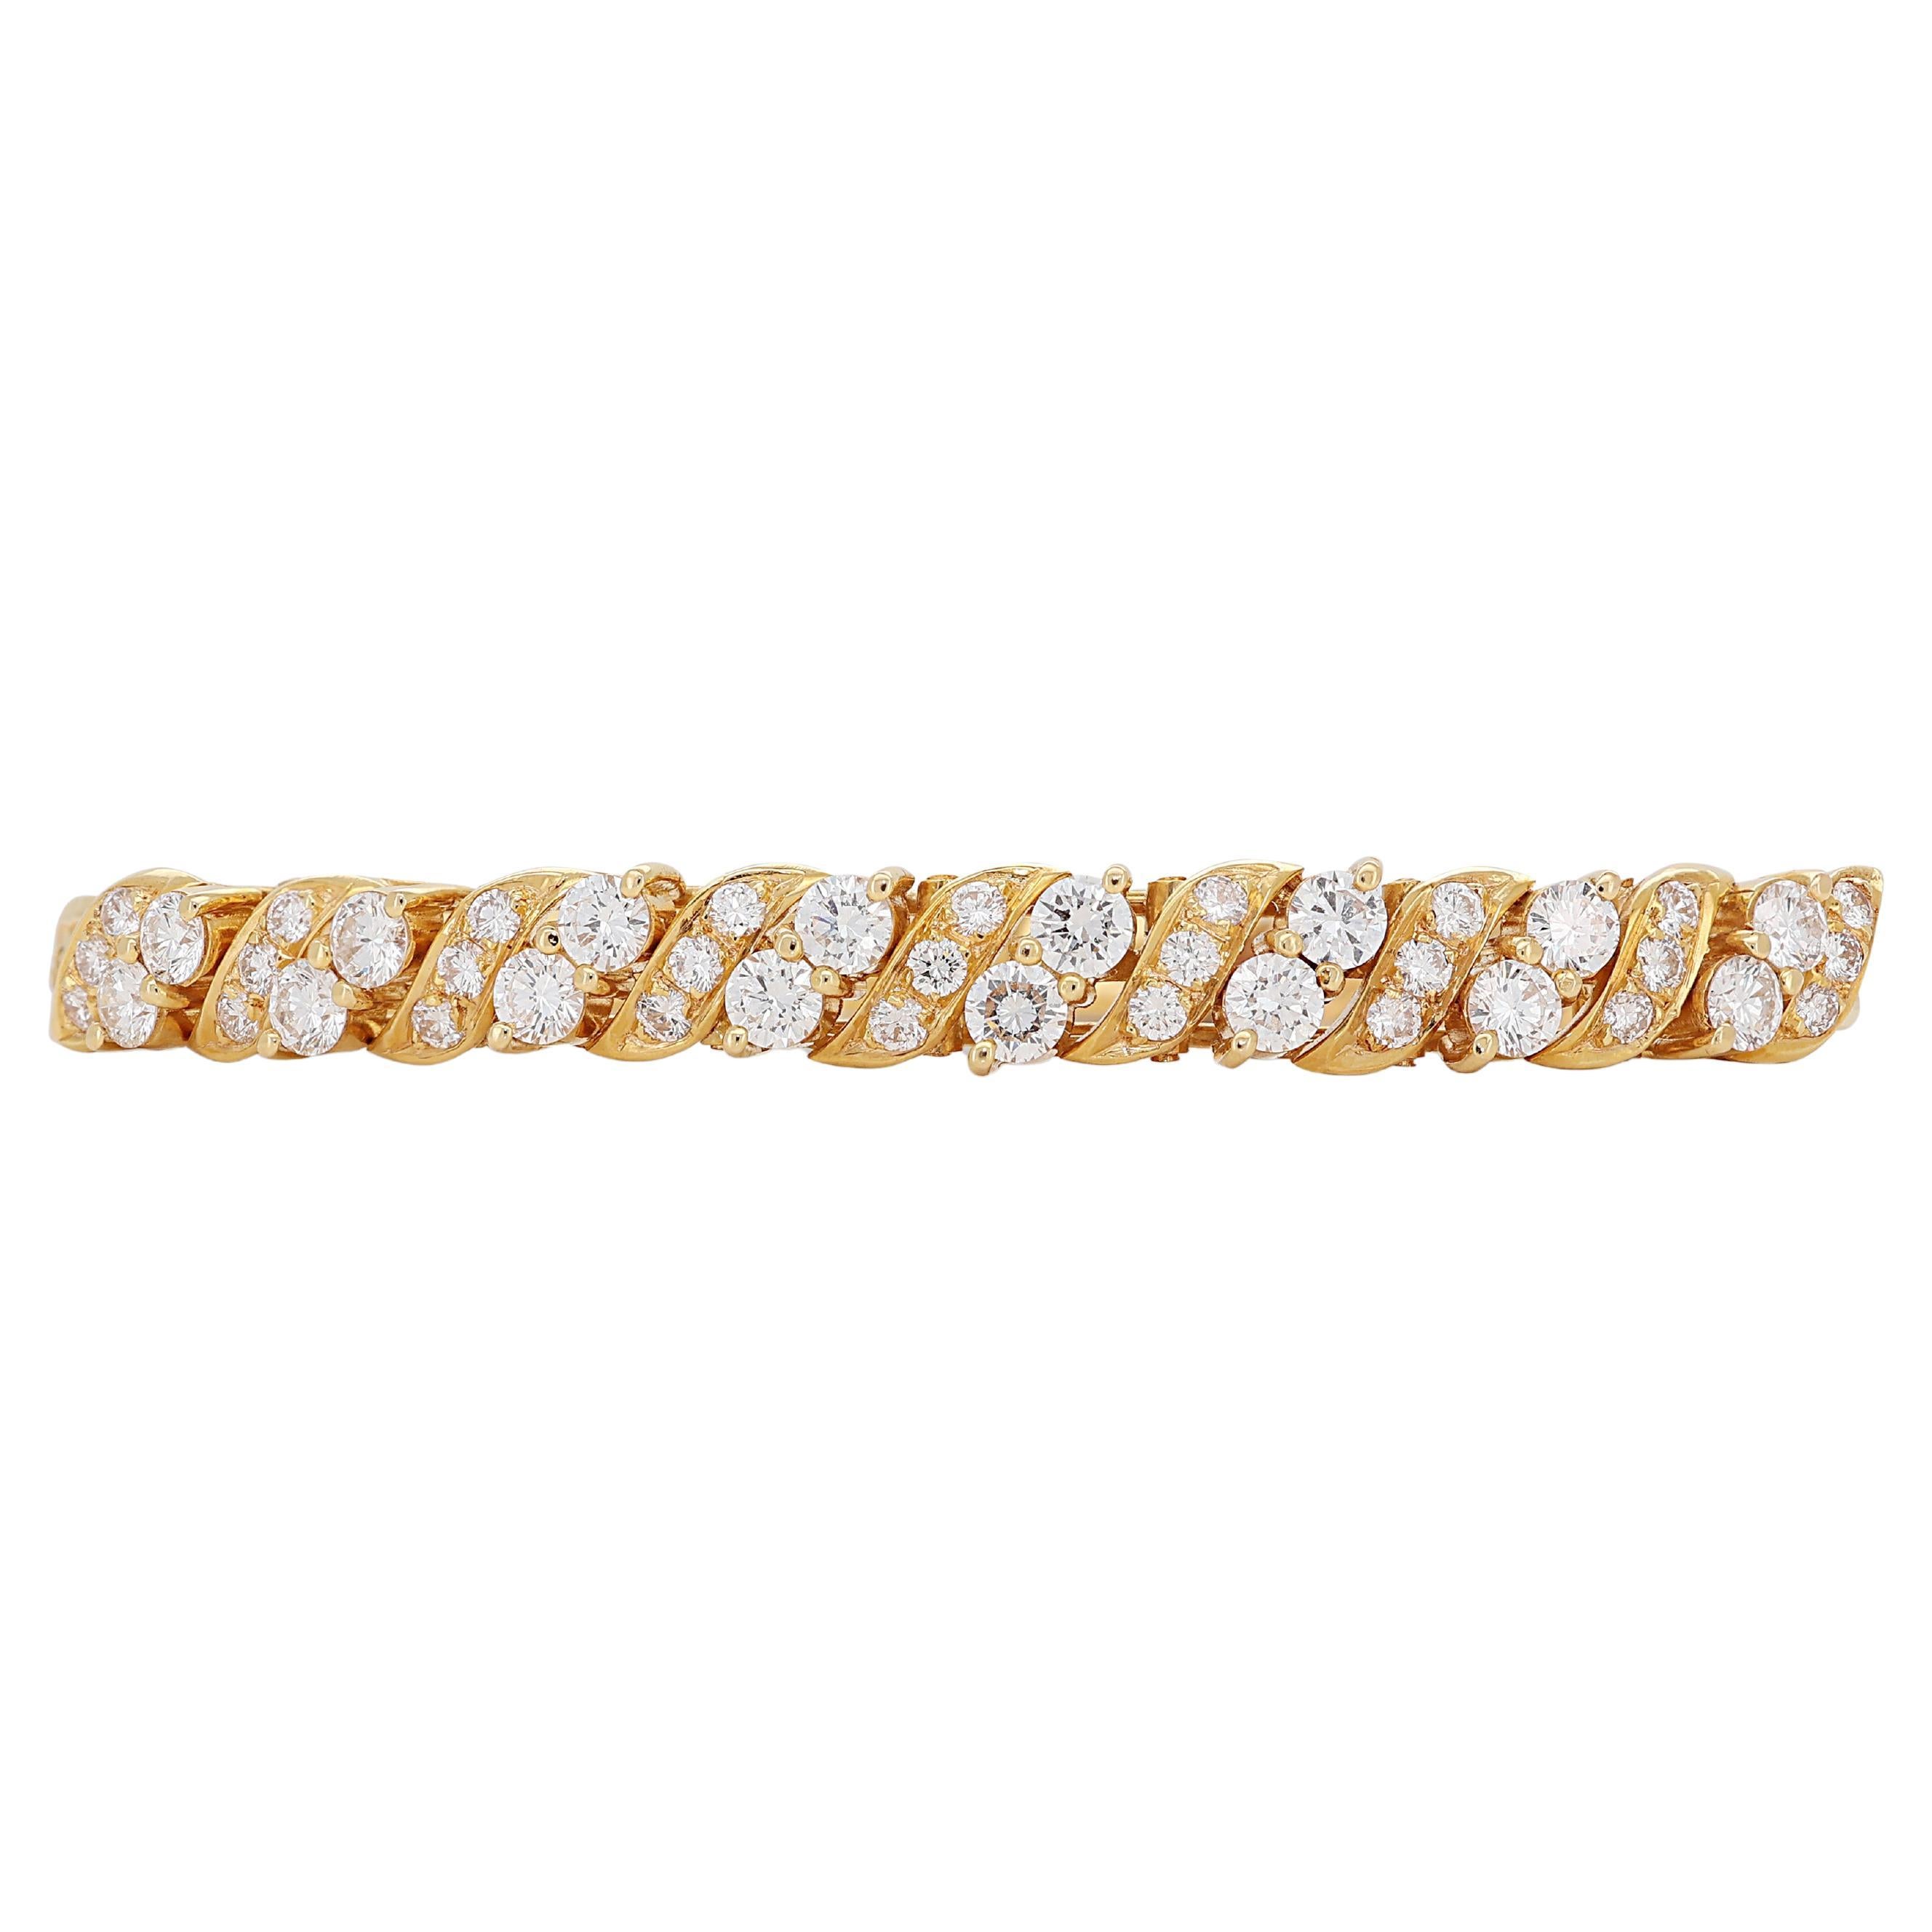 Sophisticated 1.87ct Diamonds Bracelet in 20k Yellow Gold For Sale